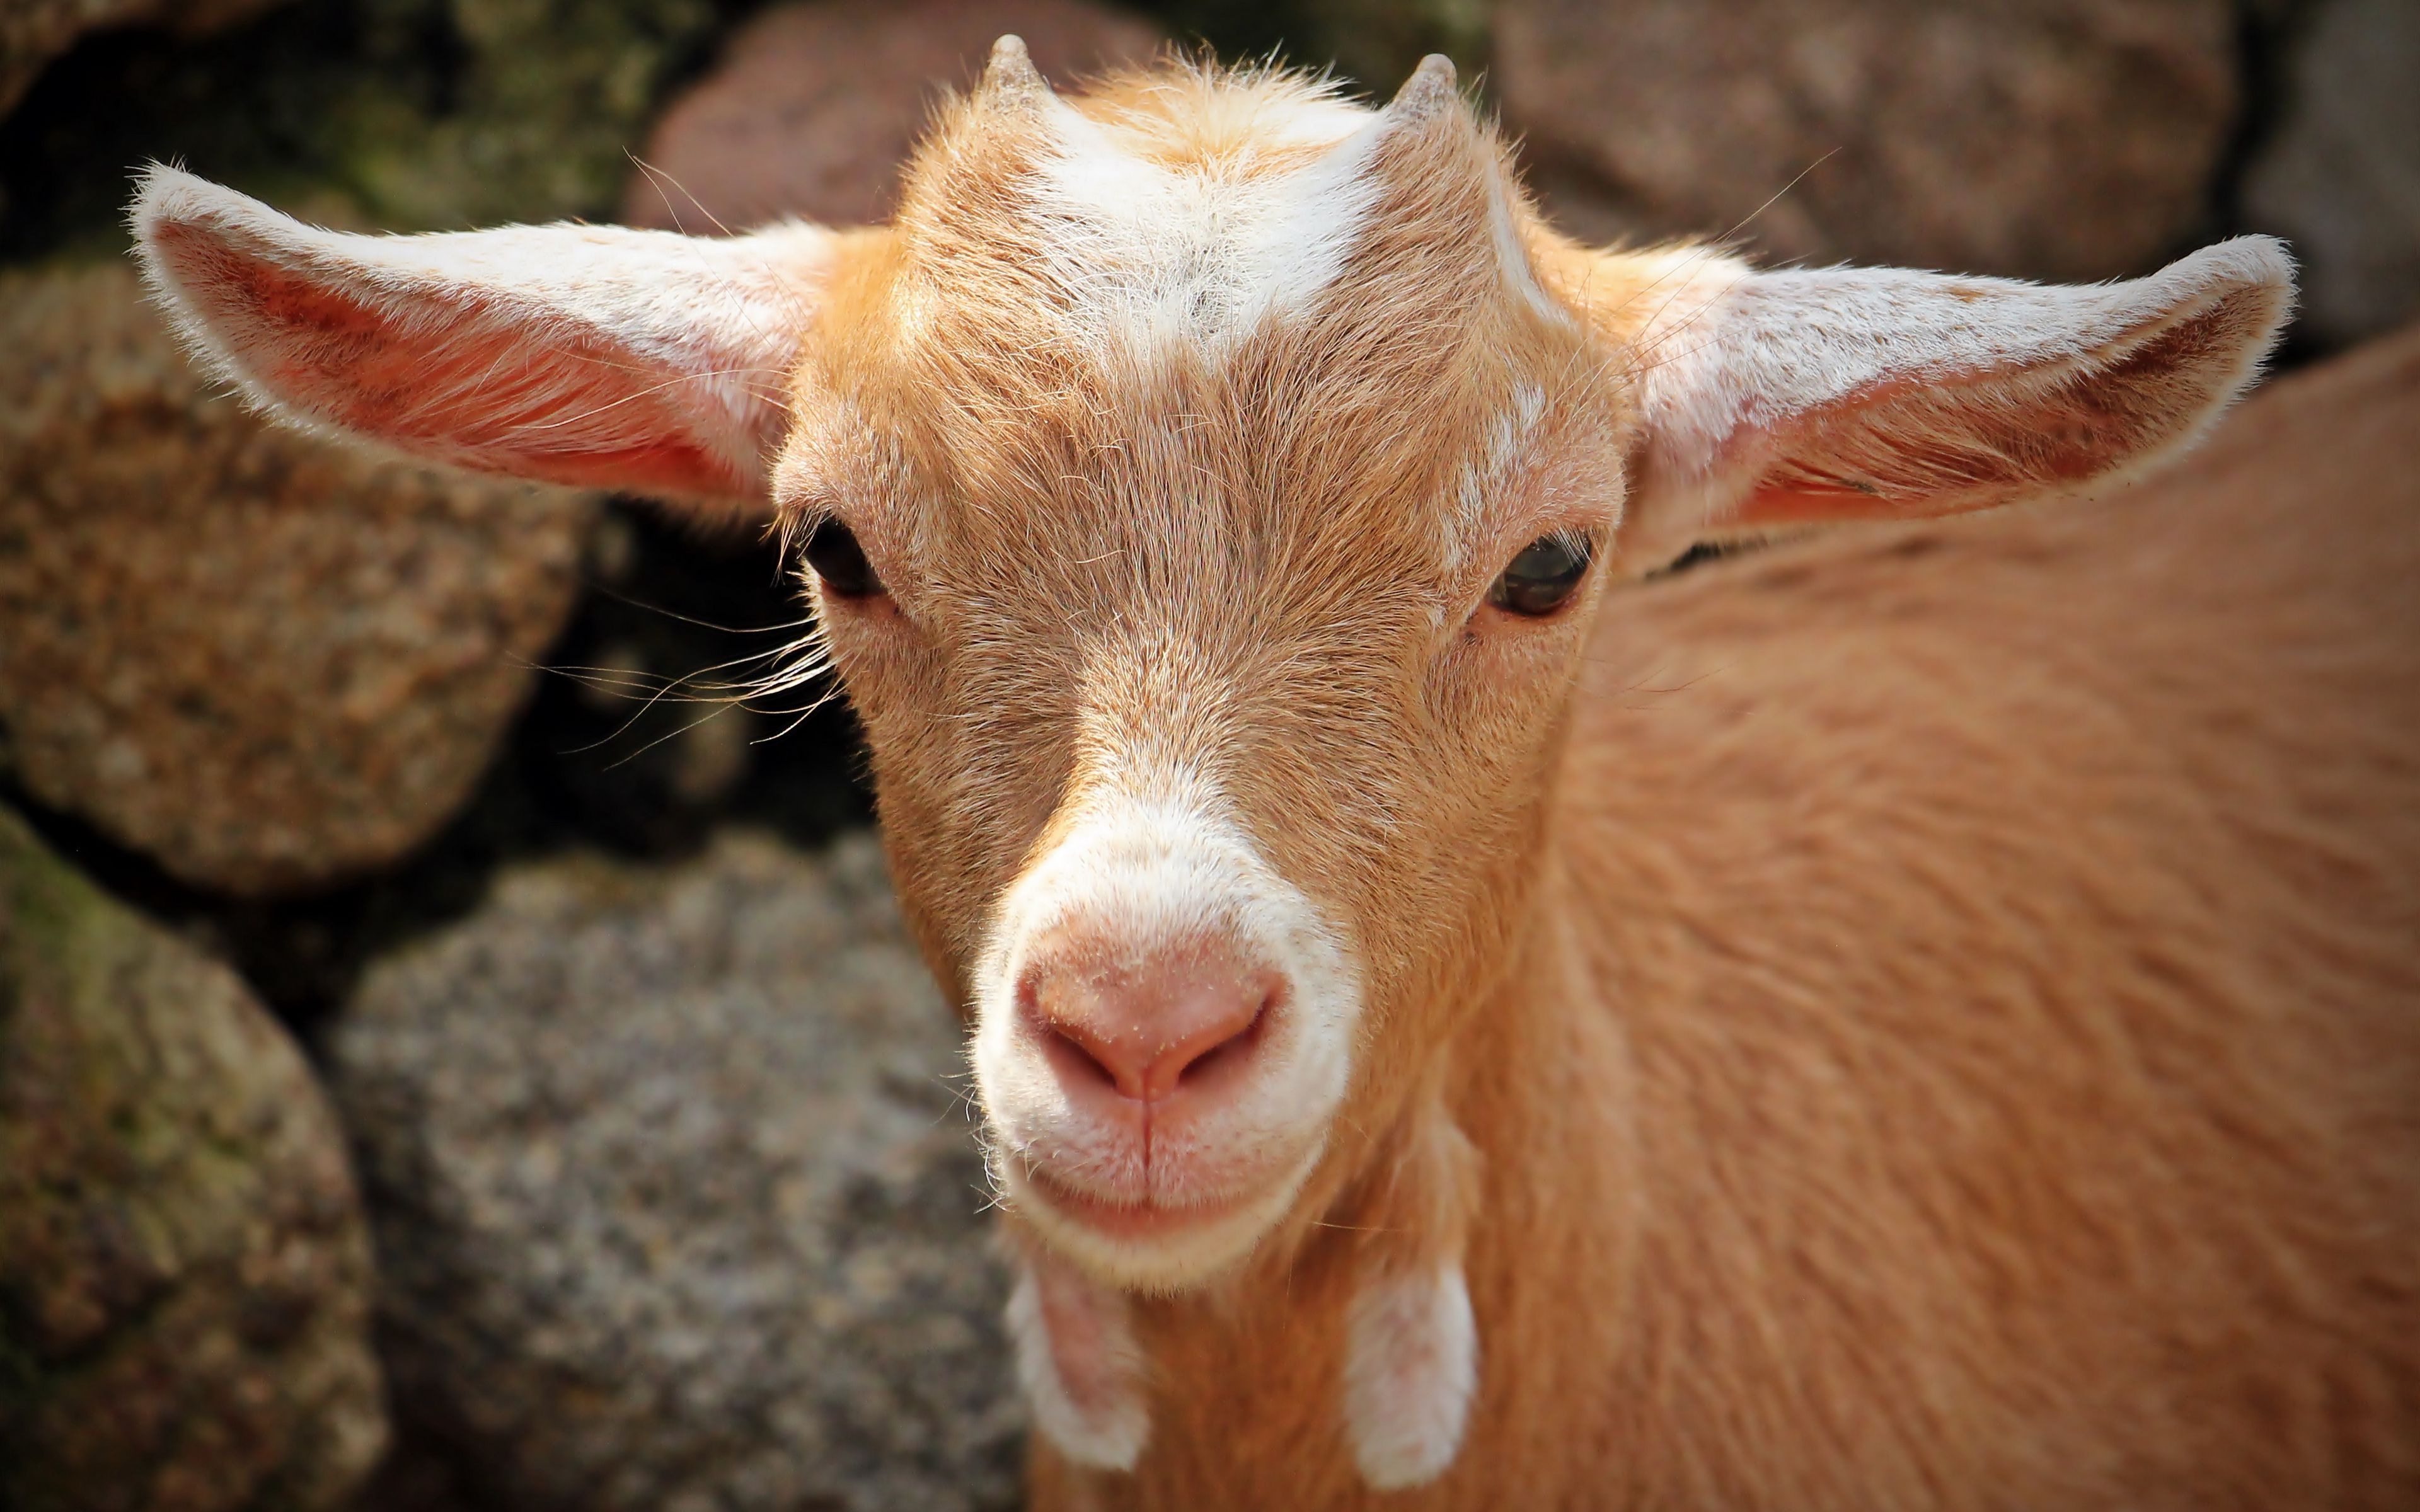 Download wallpaper 3840x2400 goat, face, young 4k ultra HD 16:10 HD background